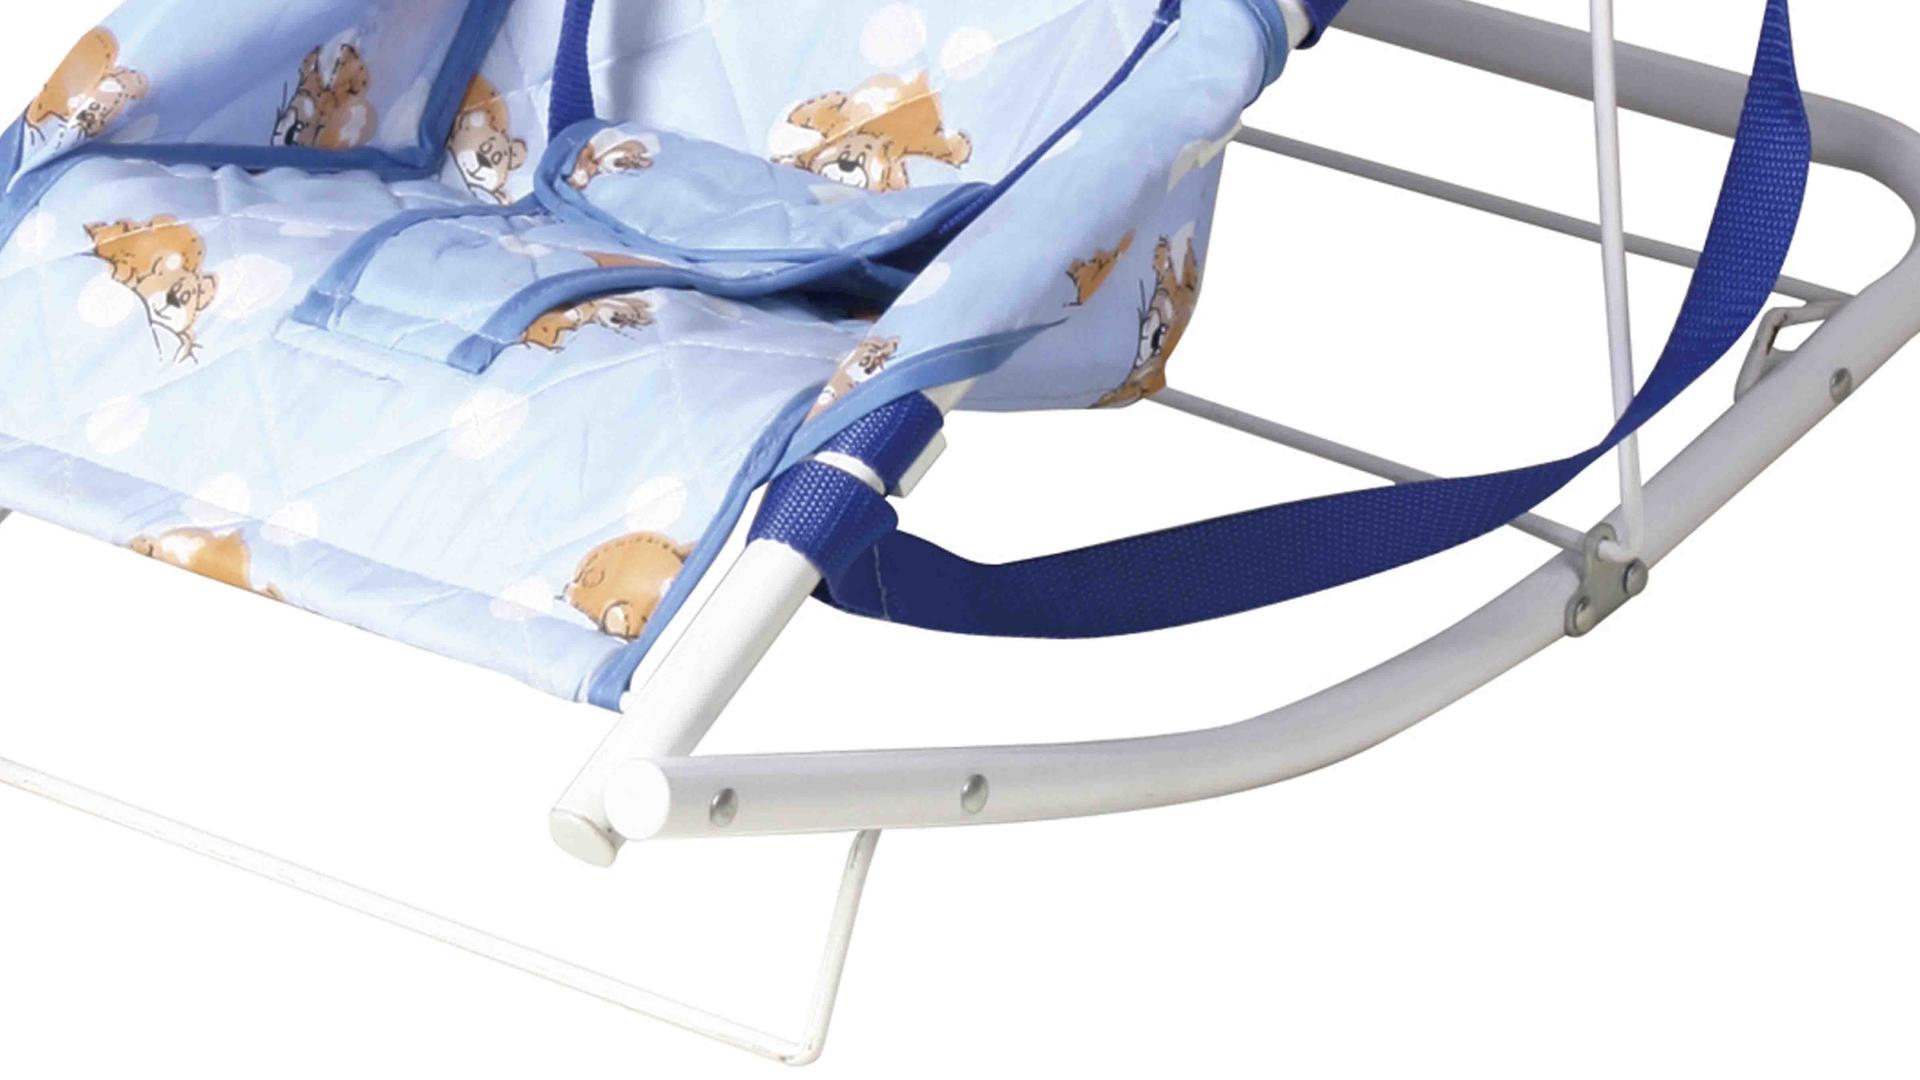 Aoqi professional cheap baby bouncer chair for infant